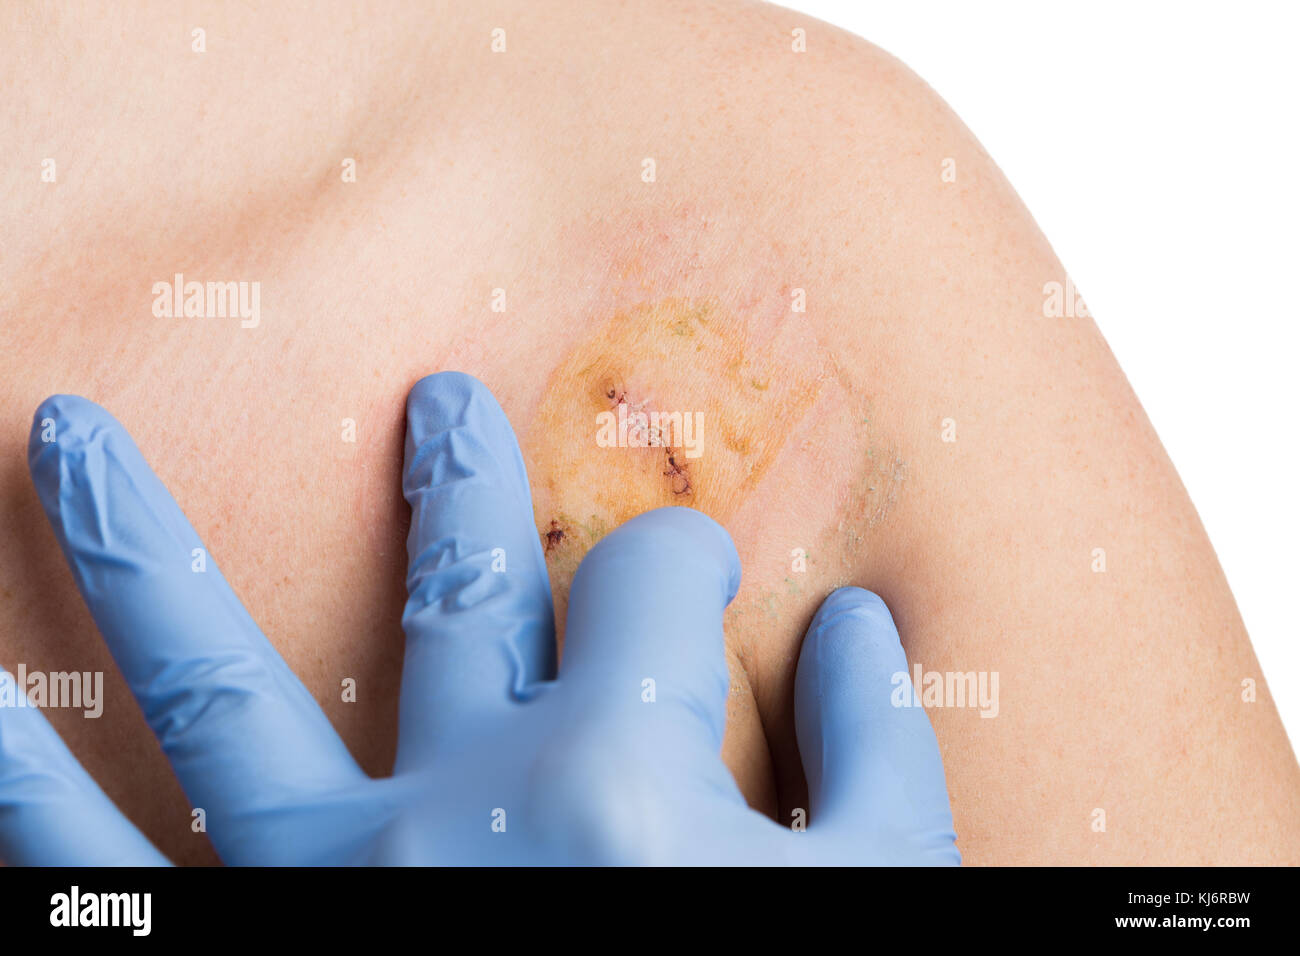 Doctor hand checking surgery suture after mole and bandage removal Stock Photo